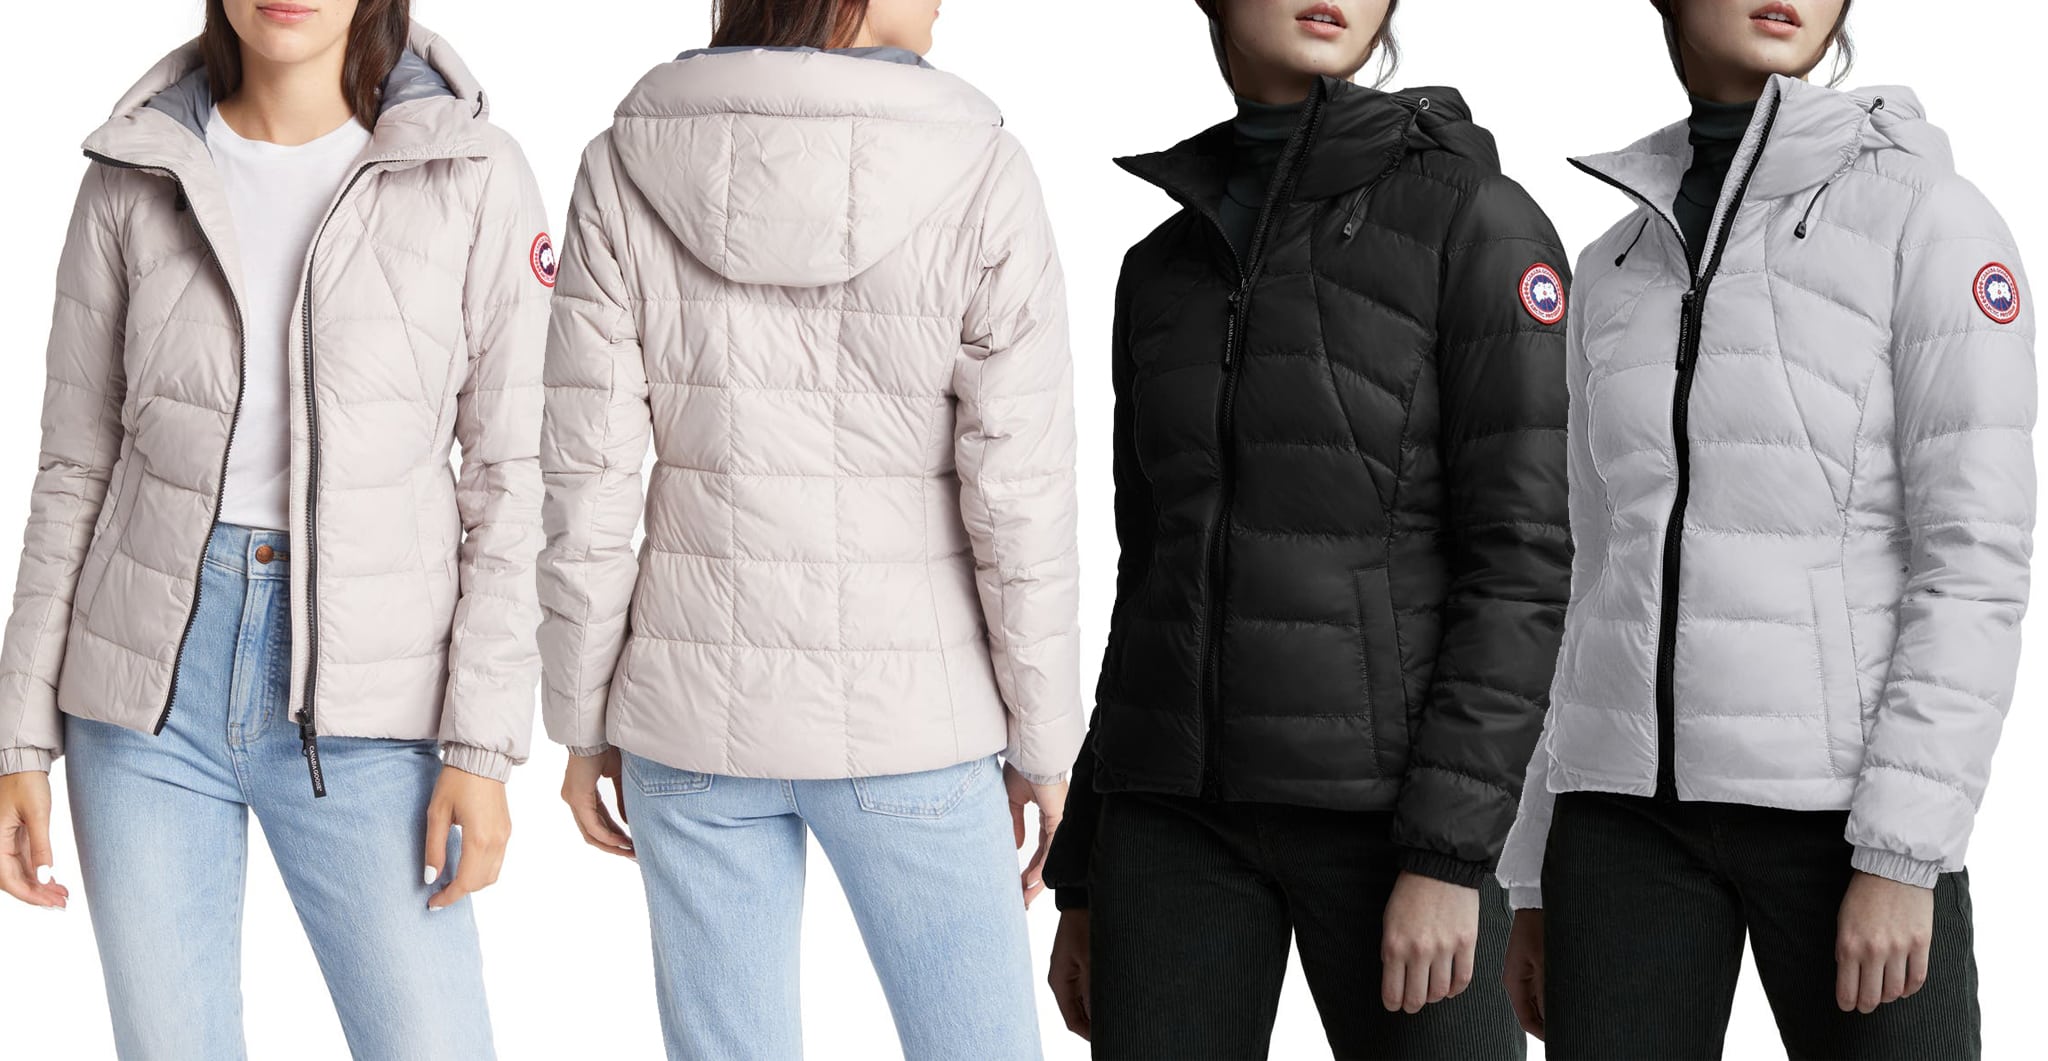 Canada Goose's Abbott is a travel-friendly, packable jacket made of lightweight non-stretch technical weave fabric, lined with 750-fill-power Hutterite white goose down insulation